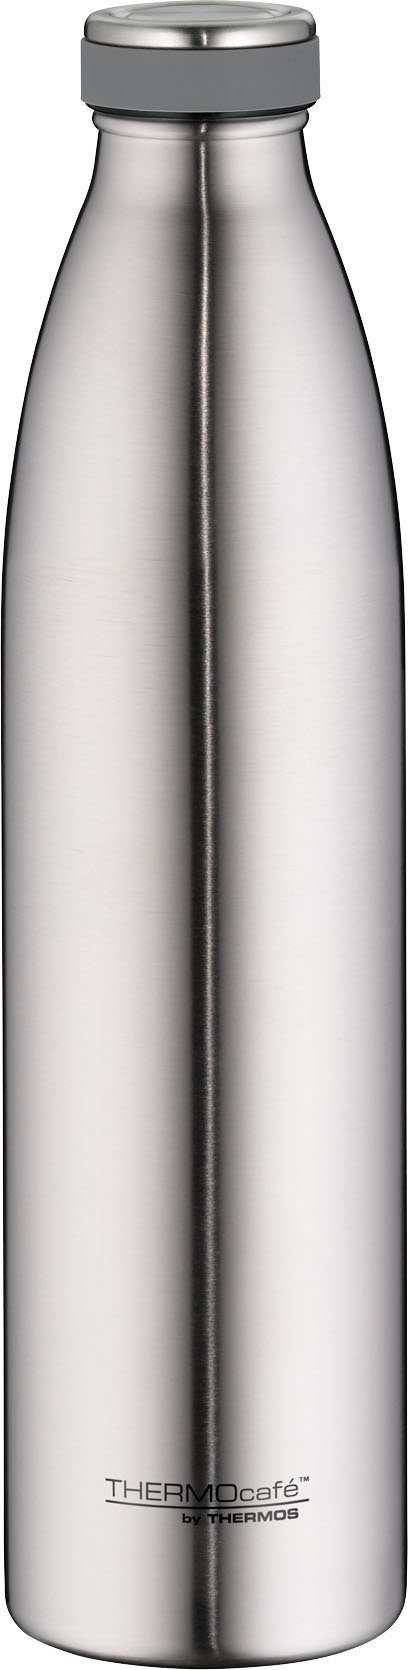 THERMOS Thermoflasche Thermo Cafe silberfarben